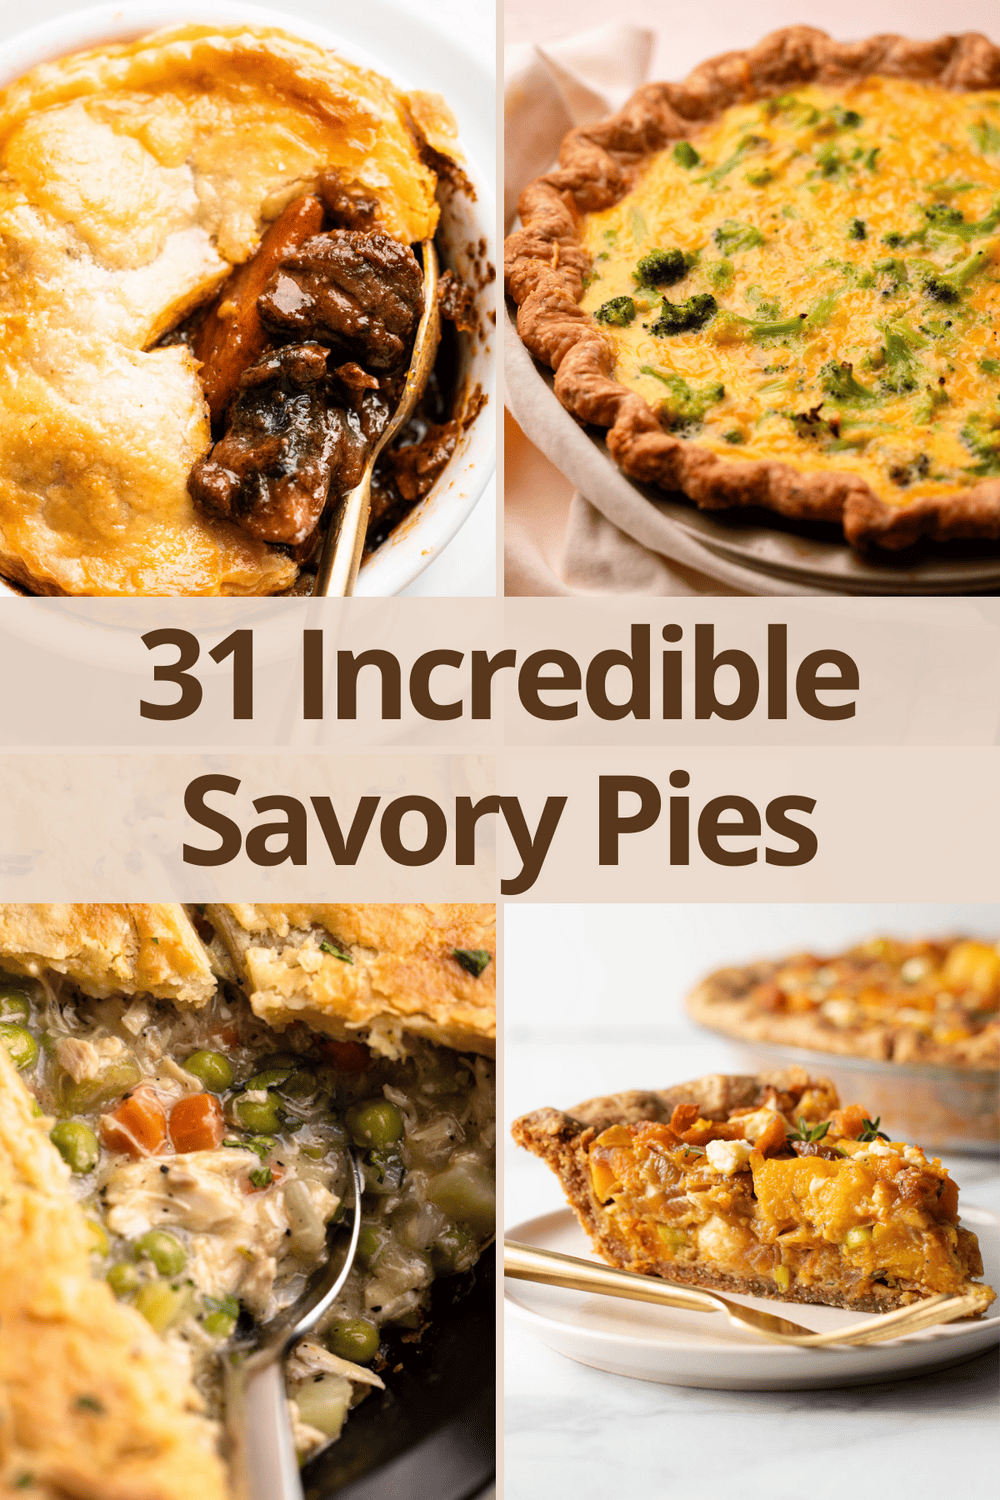 A baked beef pot pie, broccoli cheese quiche, chicken pot pie and savory squash pie.